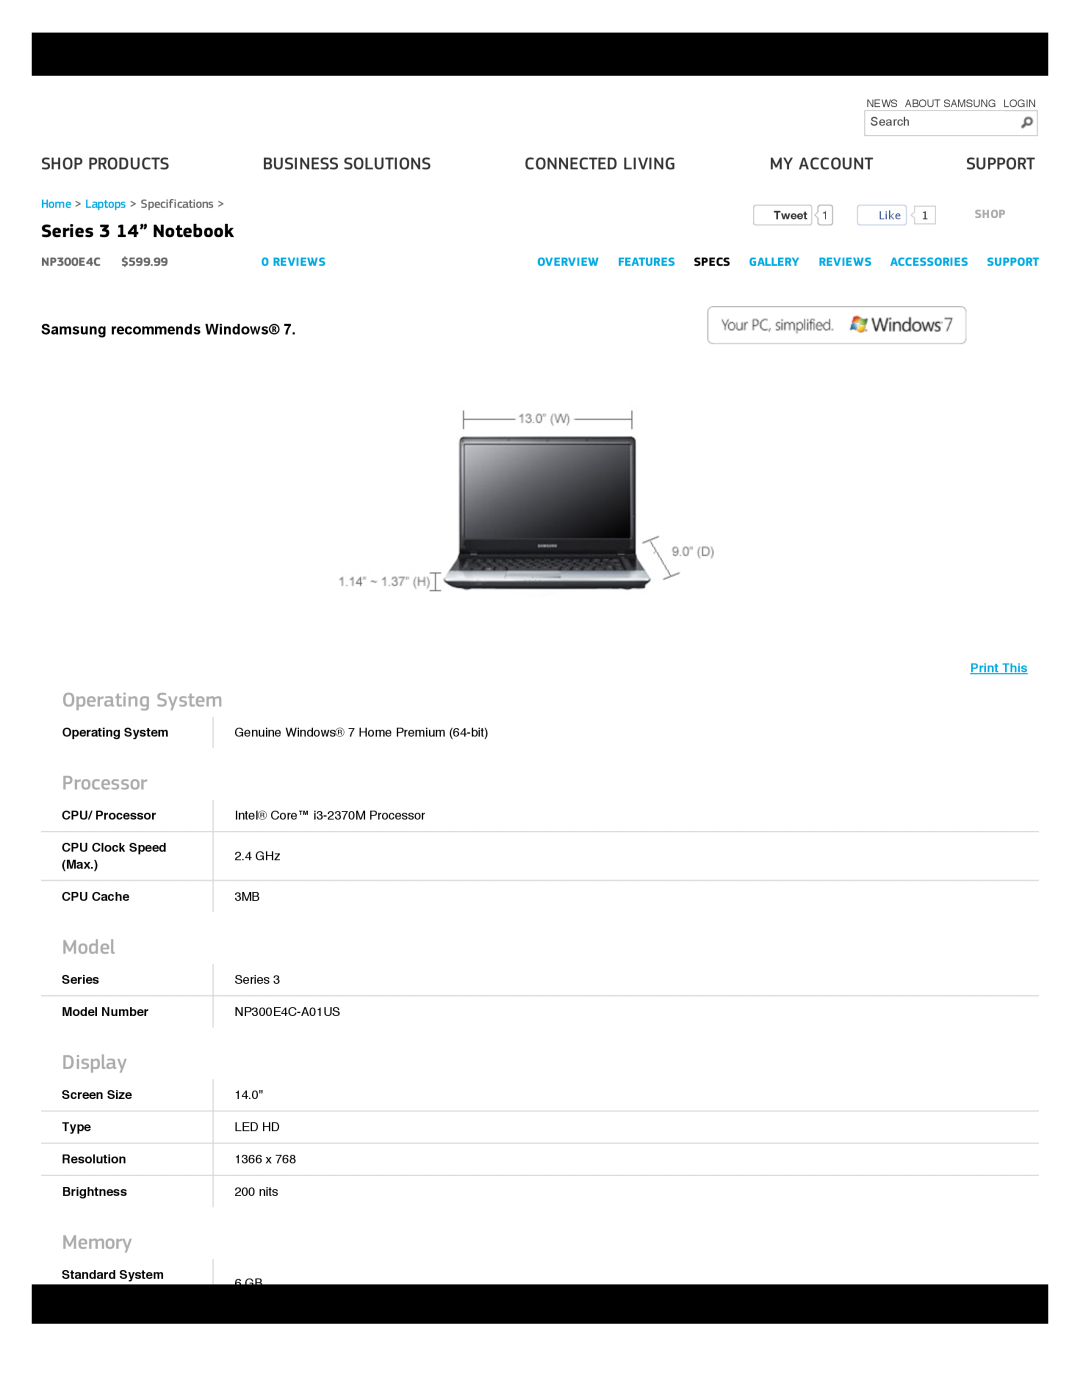 Samsung NP300E4CA0CVE specifications OperatingSystem, Processor, Model, Display, Memory, Series314”Notebook, Shopproducts 